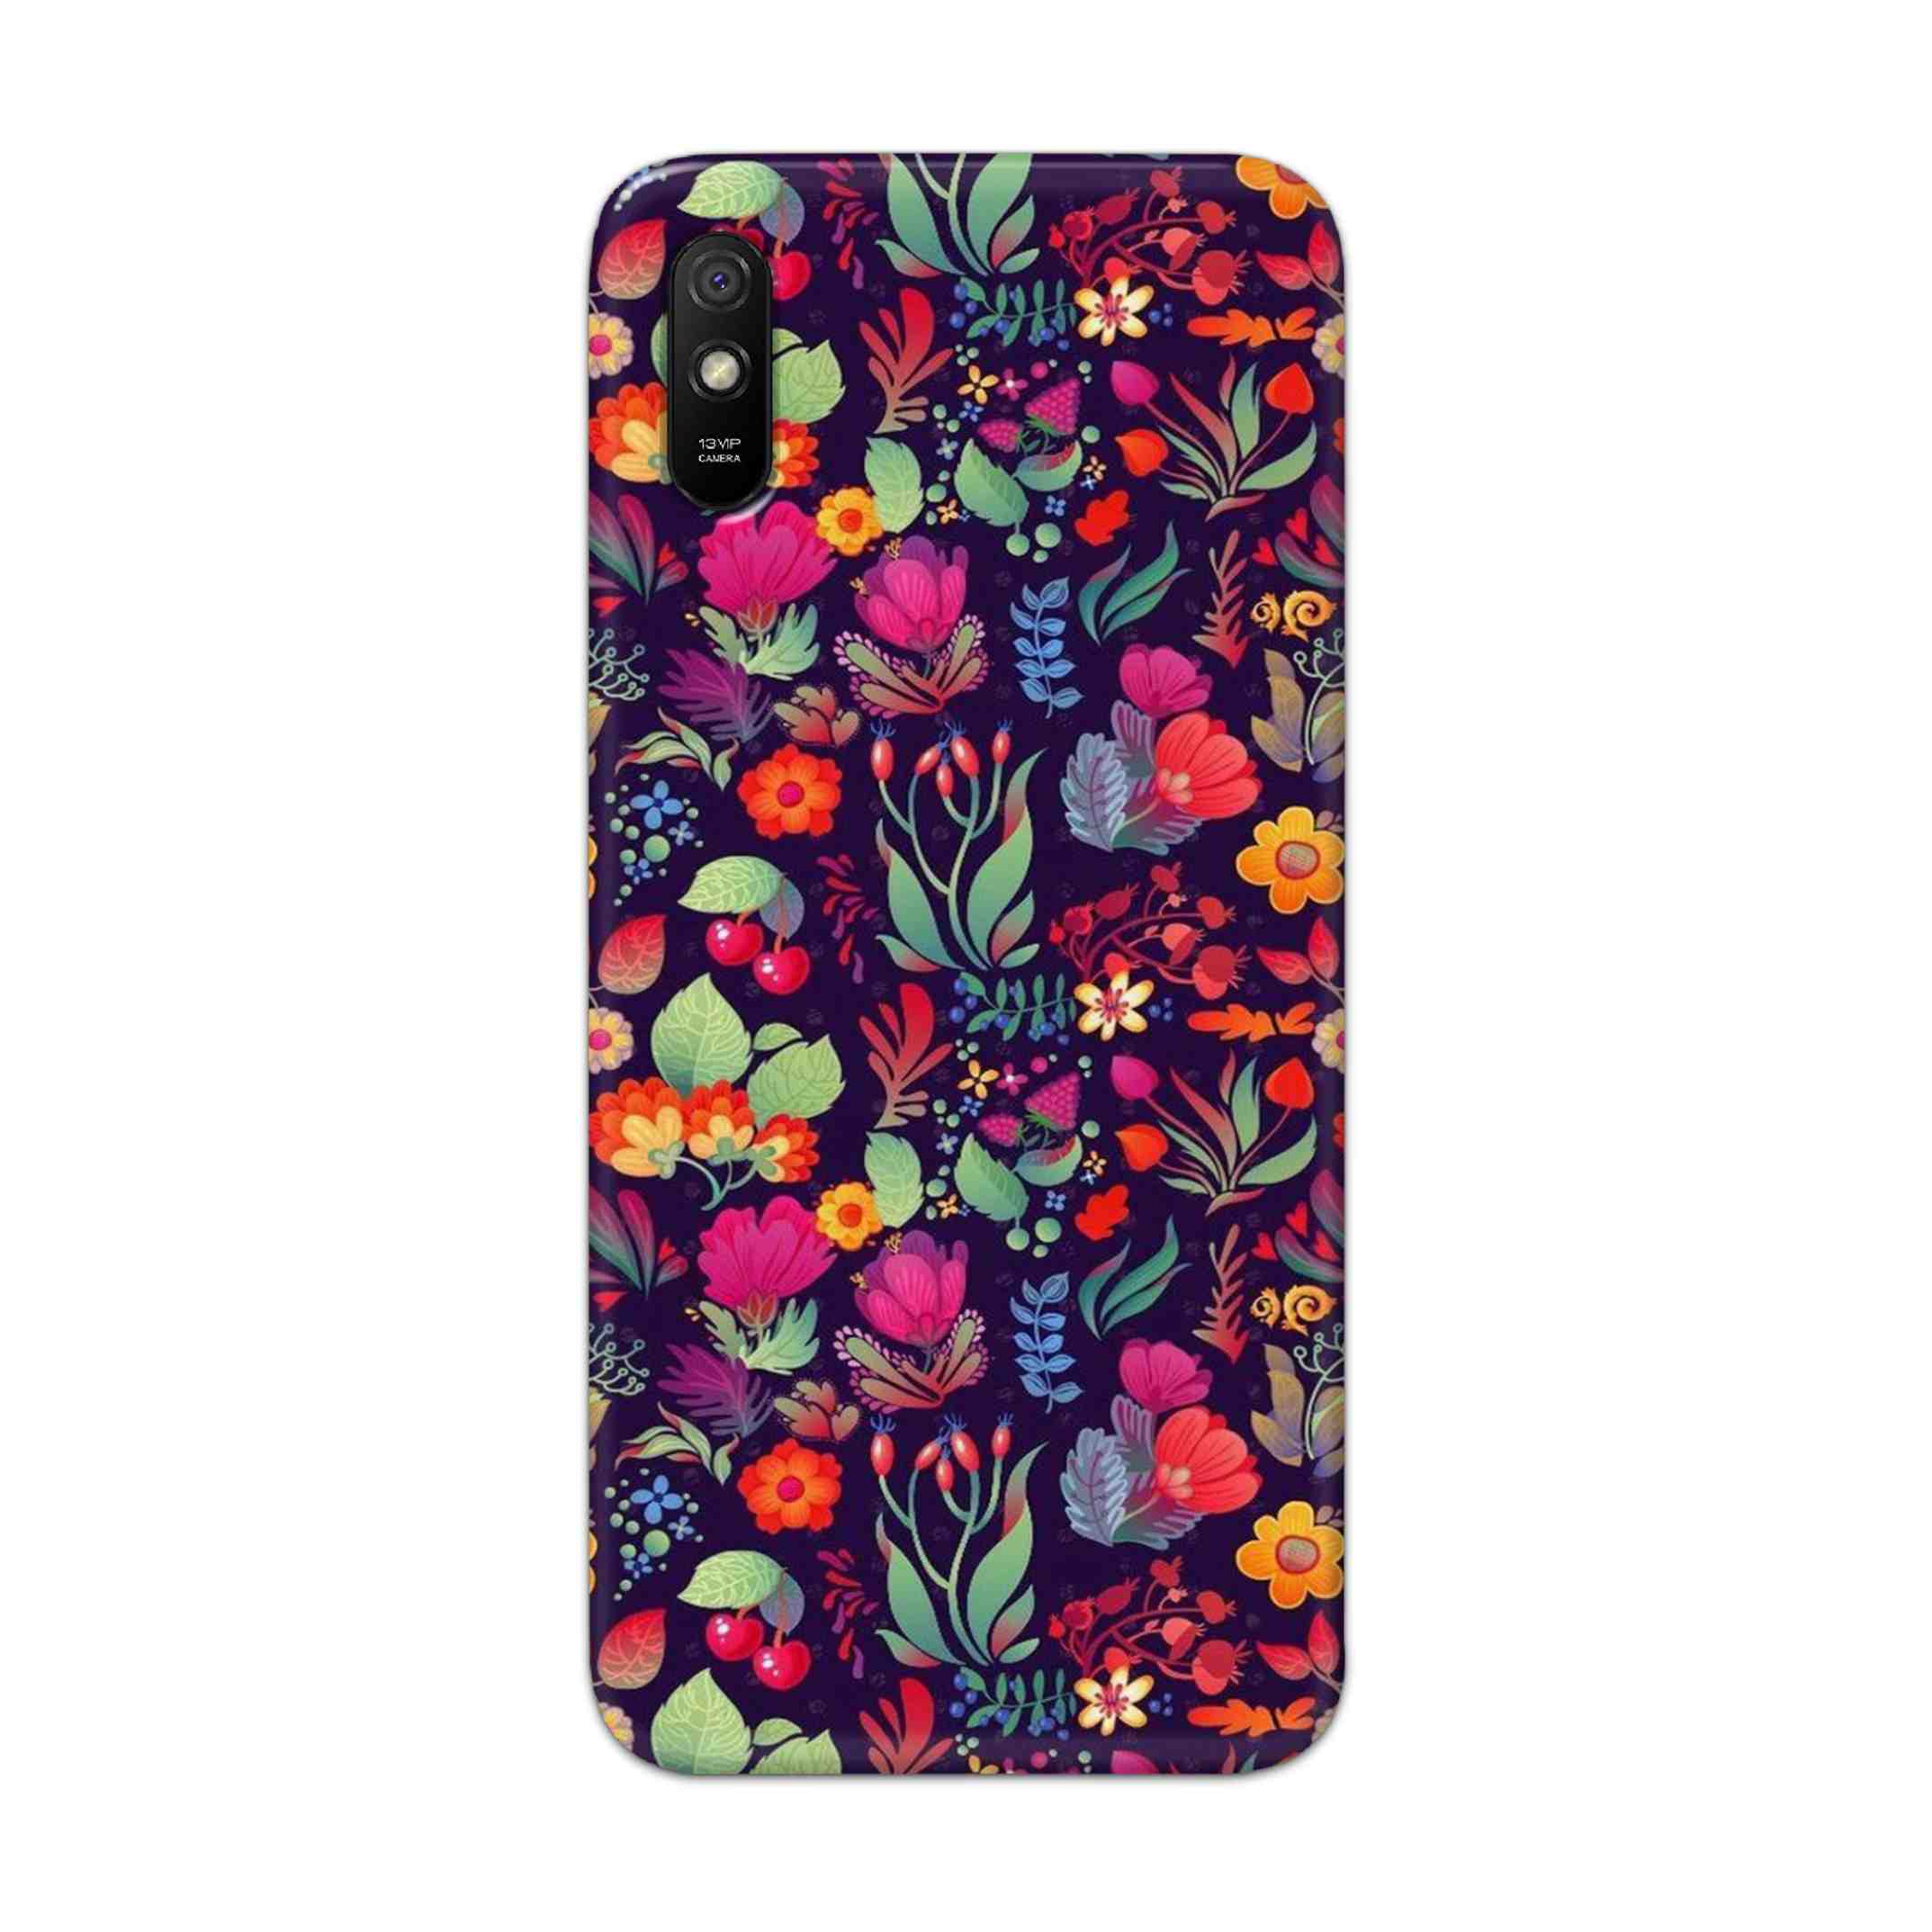 Buy Fruits Flower Hard Back Mobile Phone Case Cover For Redmi 9A Online